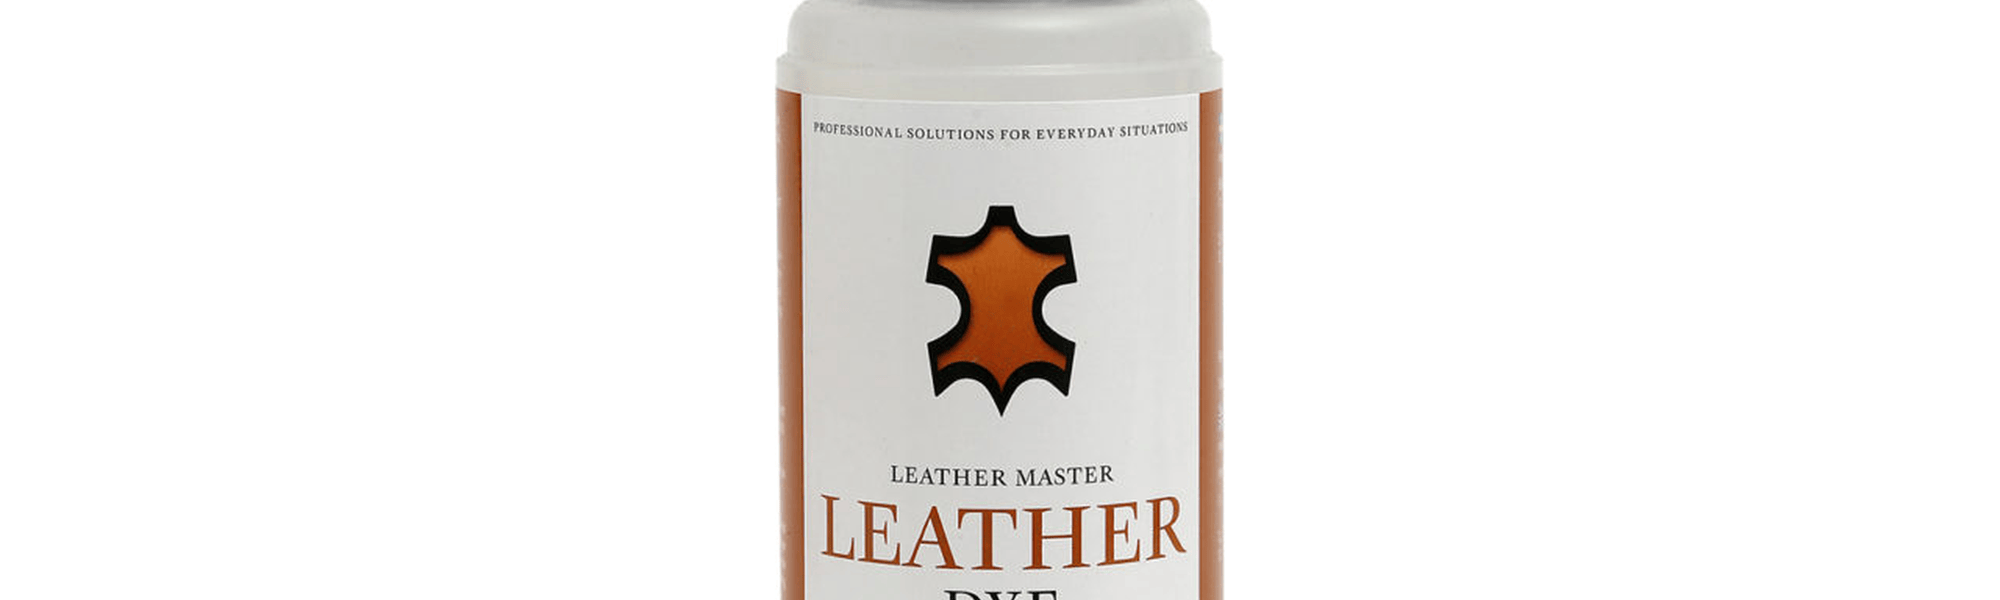 Leather Master